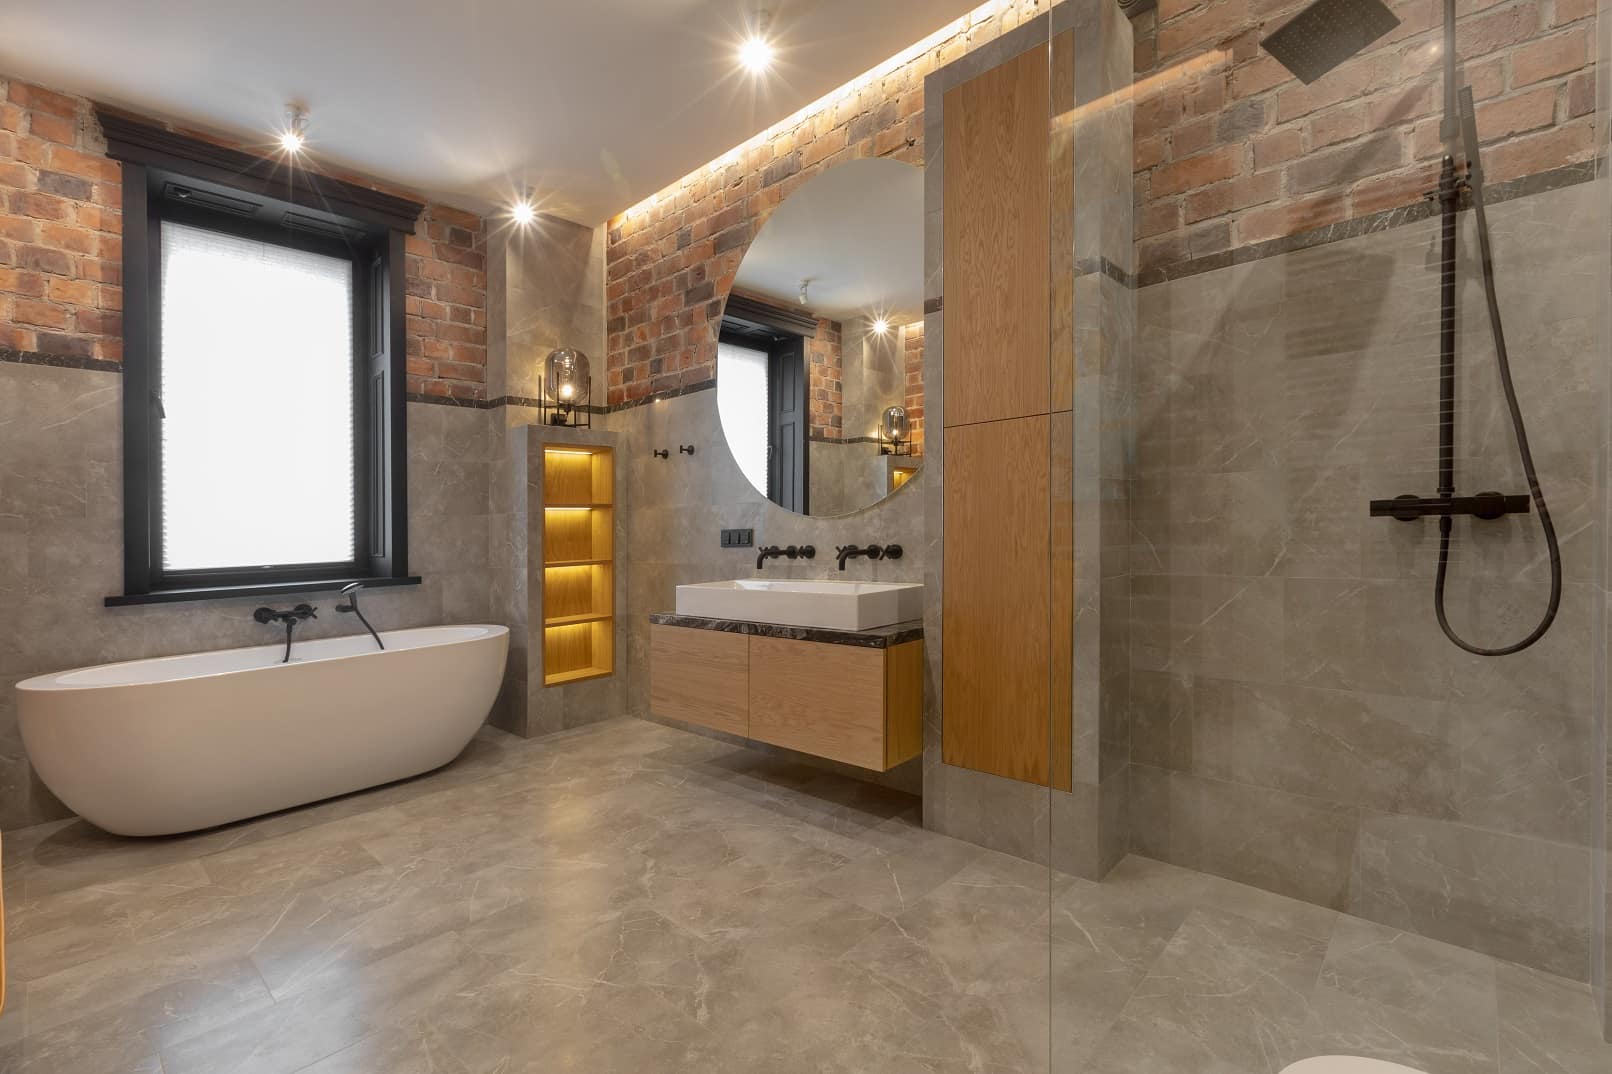 5 Reasons To Choose An Open Shower Design. Brickwork top level and faux concrete wainscoting as well as concrete floor in the modern industrial bathroom with complex lighting